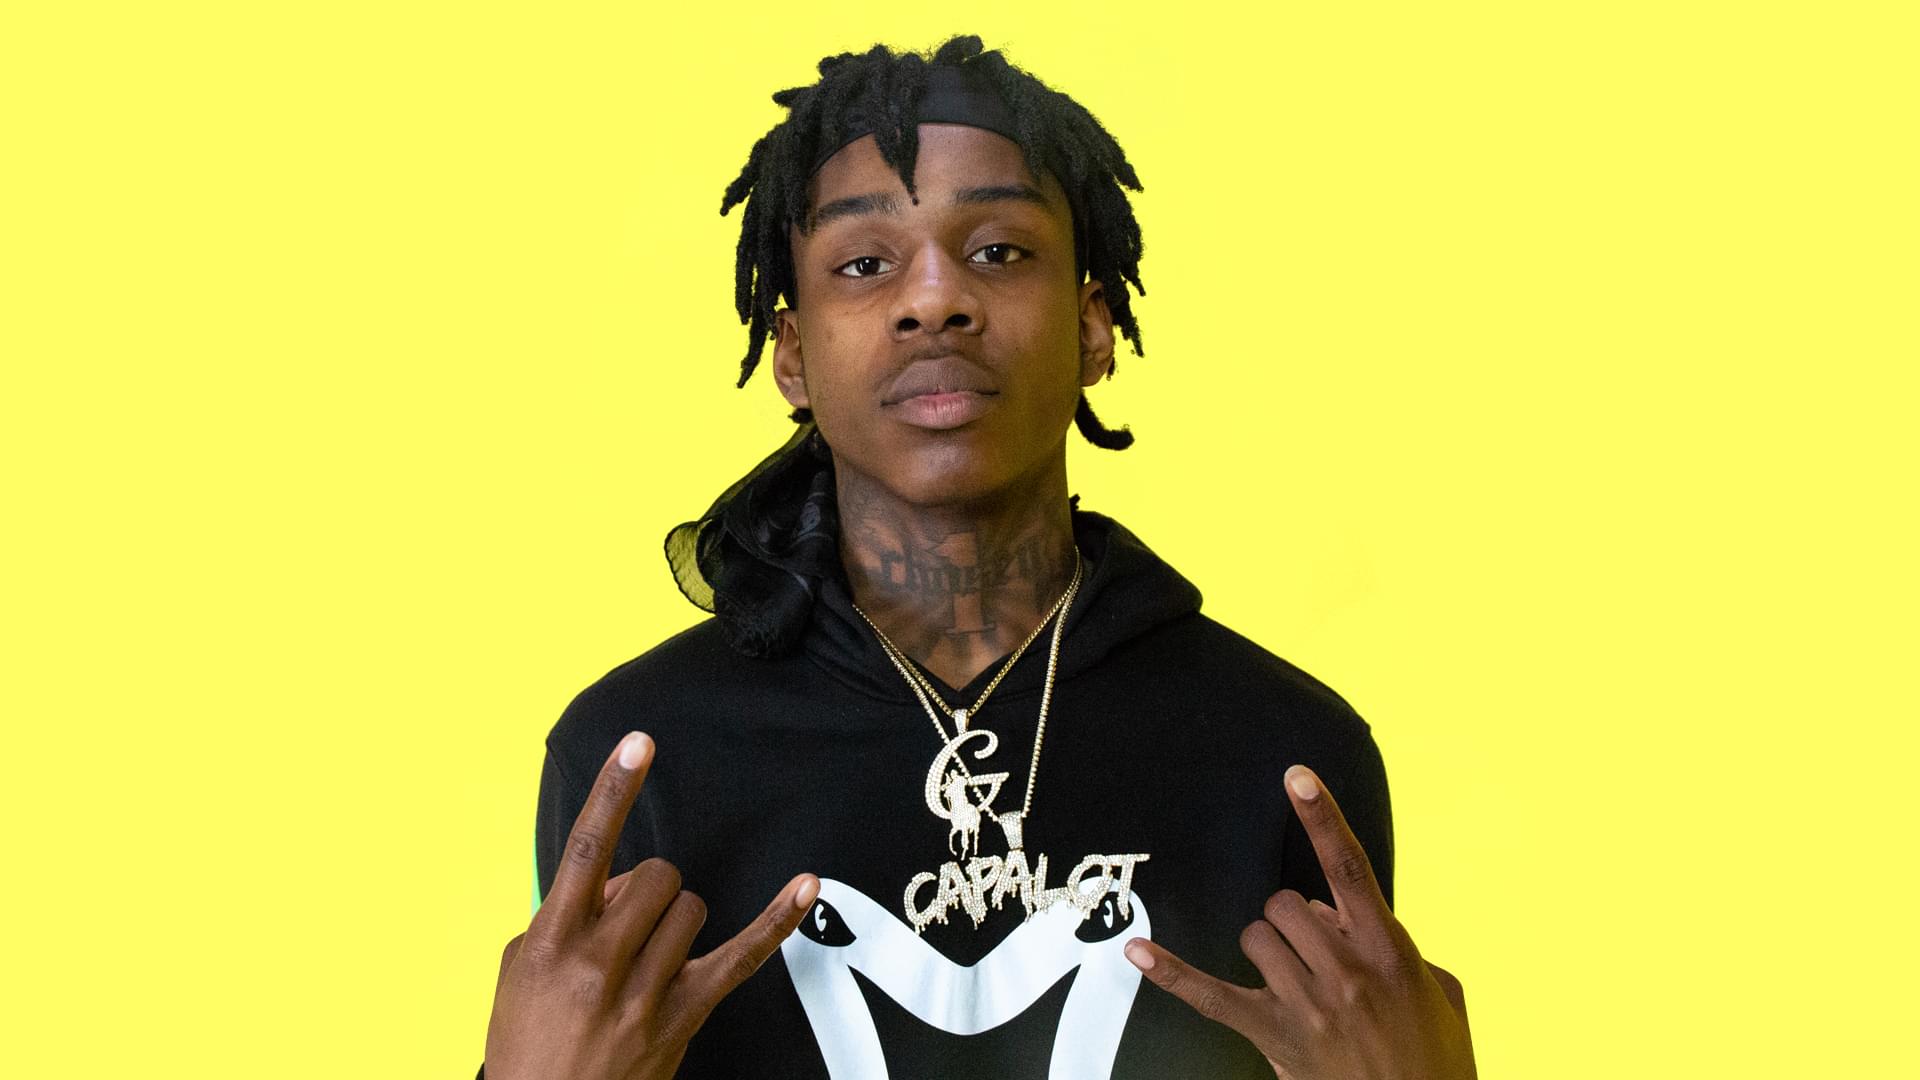 Polo G Wallpaper  Cute rappers Rapper wallpaper iphone Celebrity  wallpapers